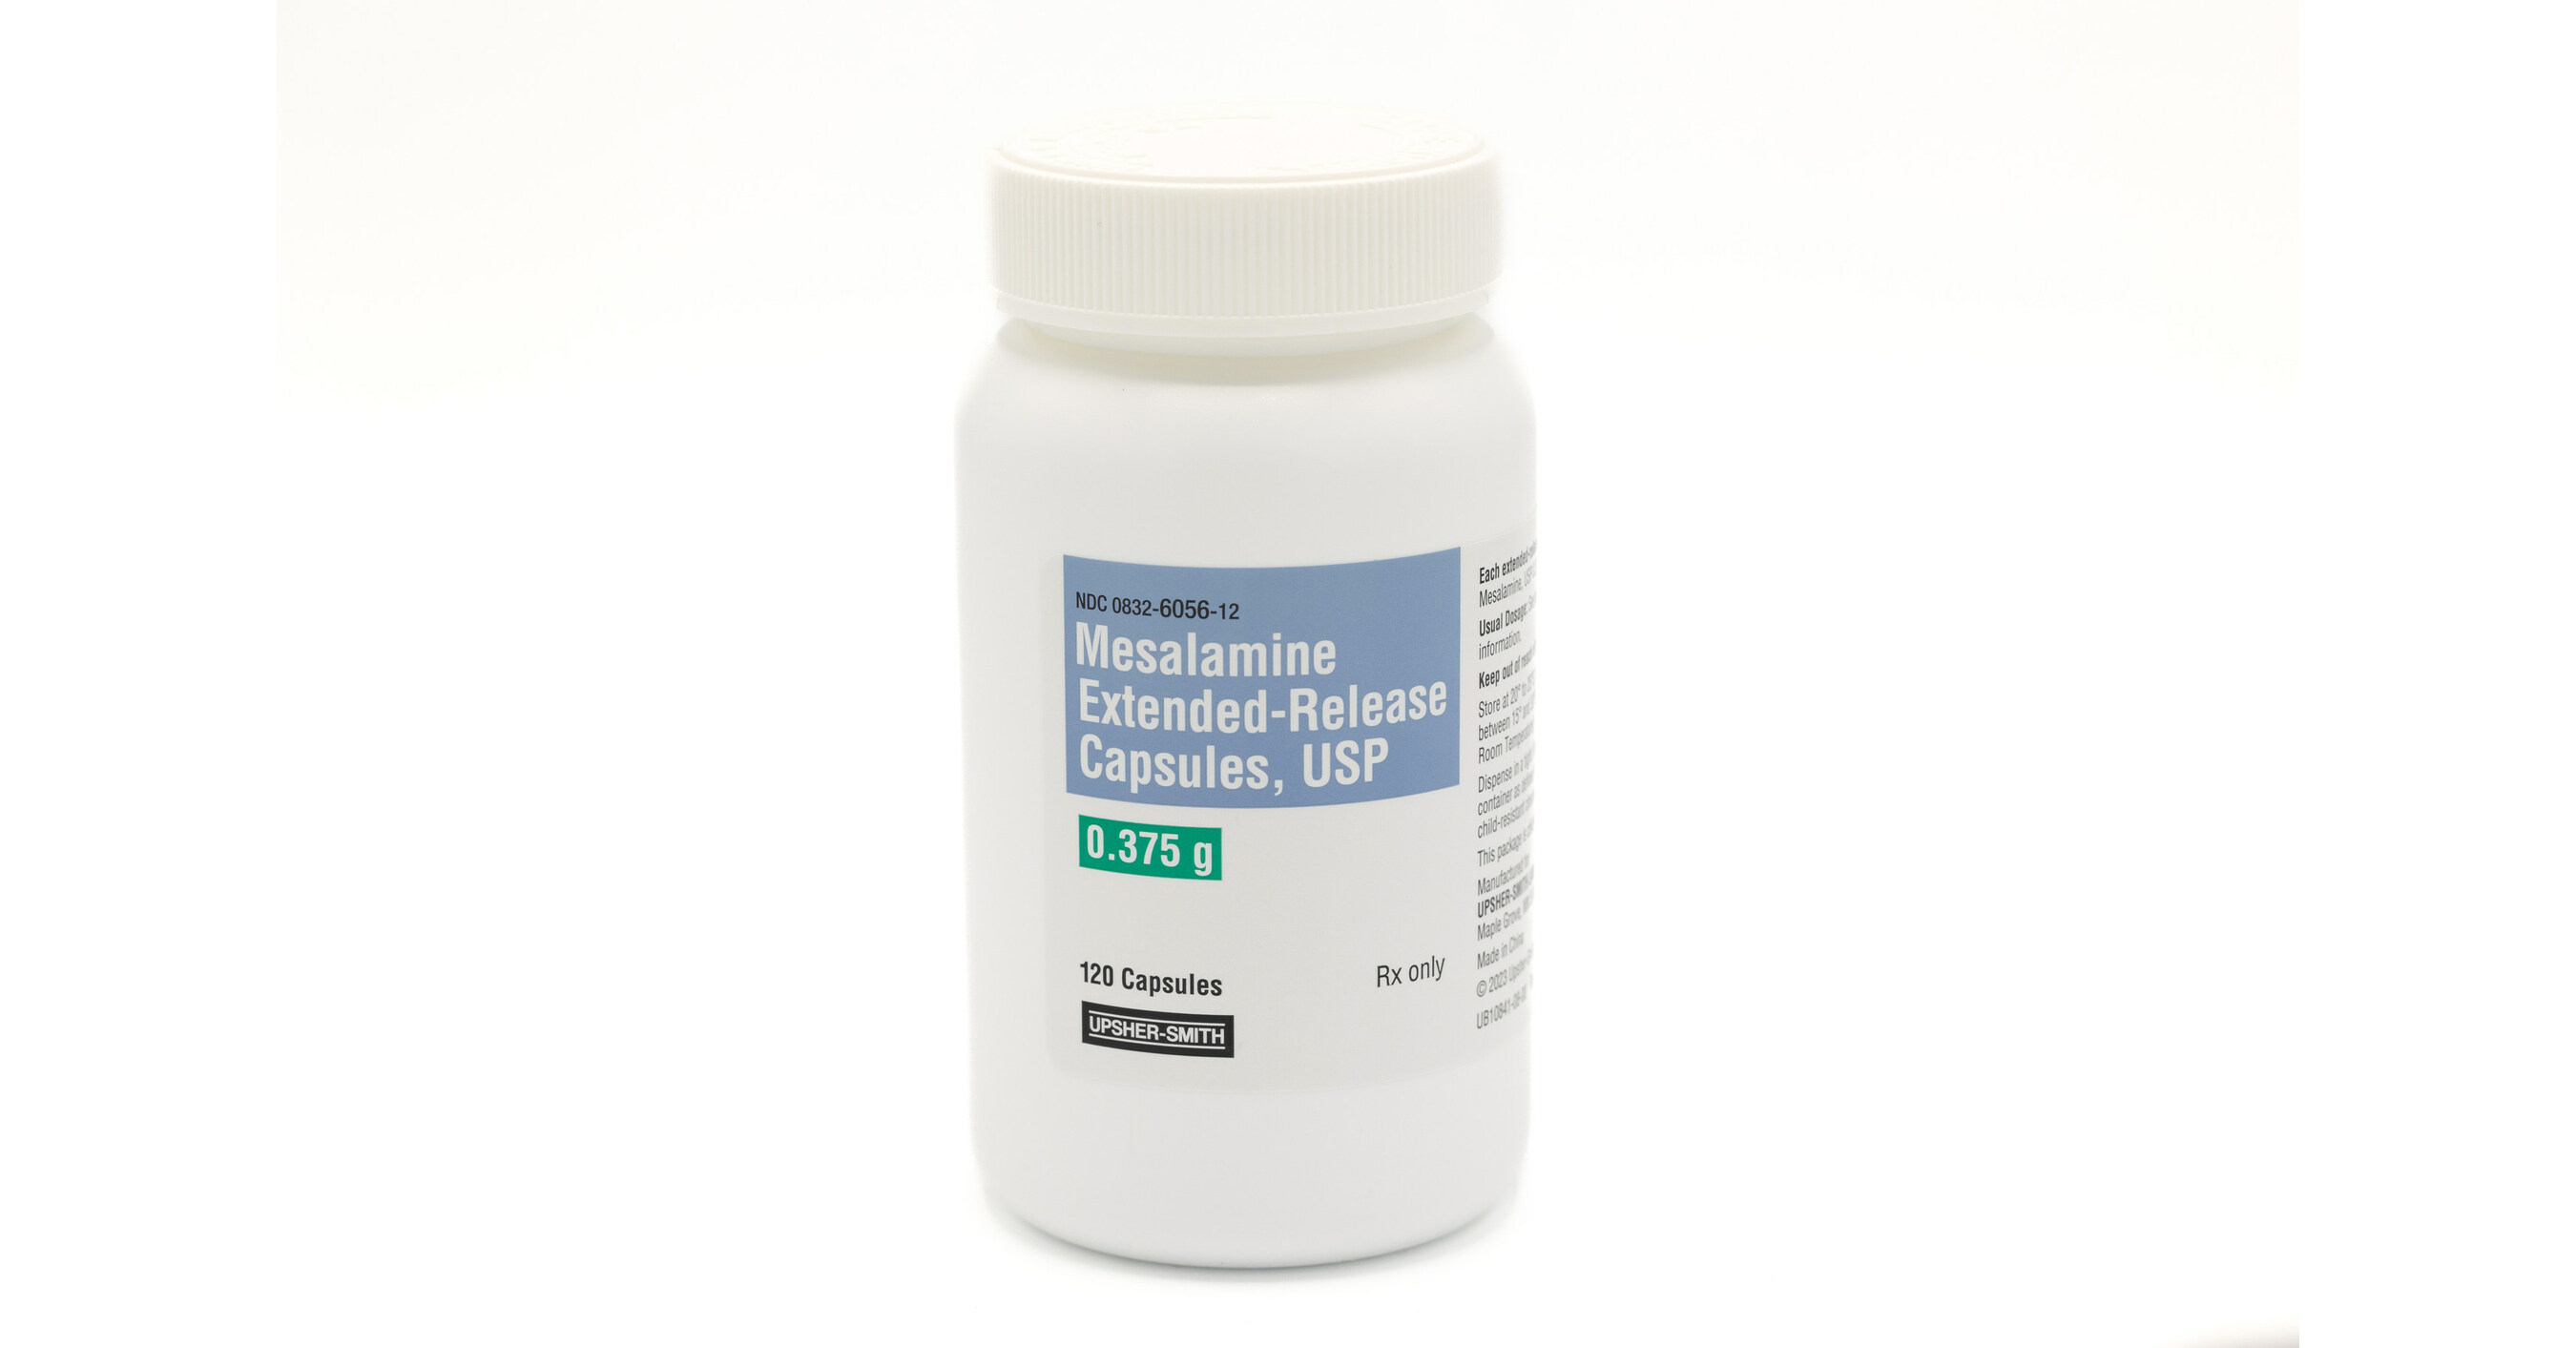 Upsher Smith Expands Generics Portfolio With Launch Of Mesalamine Extended Release Capsules Usp